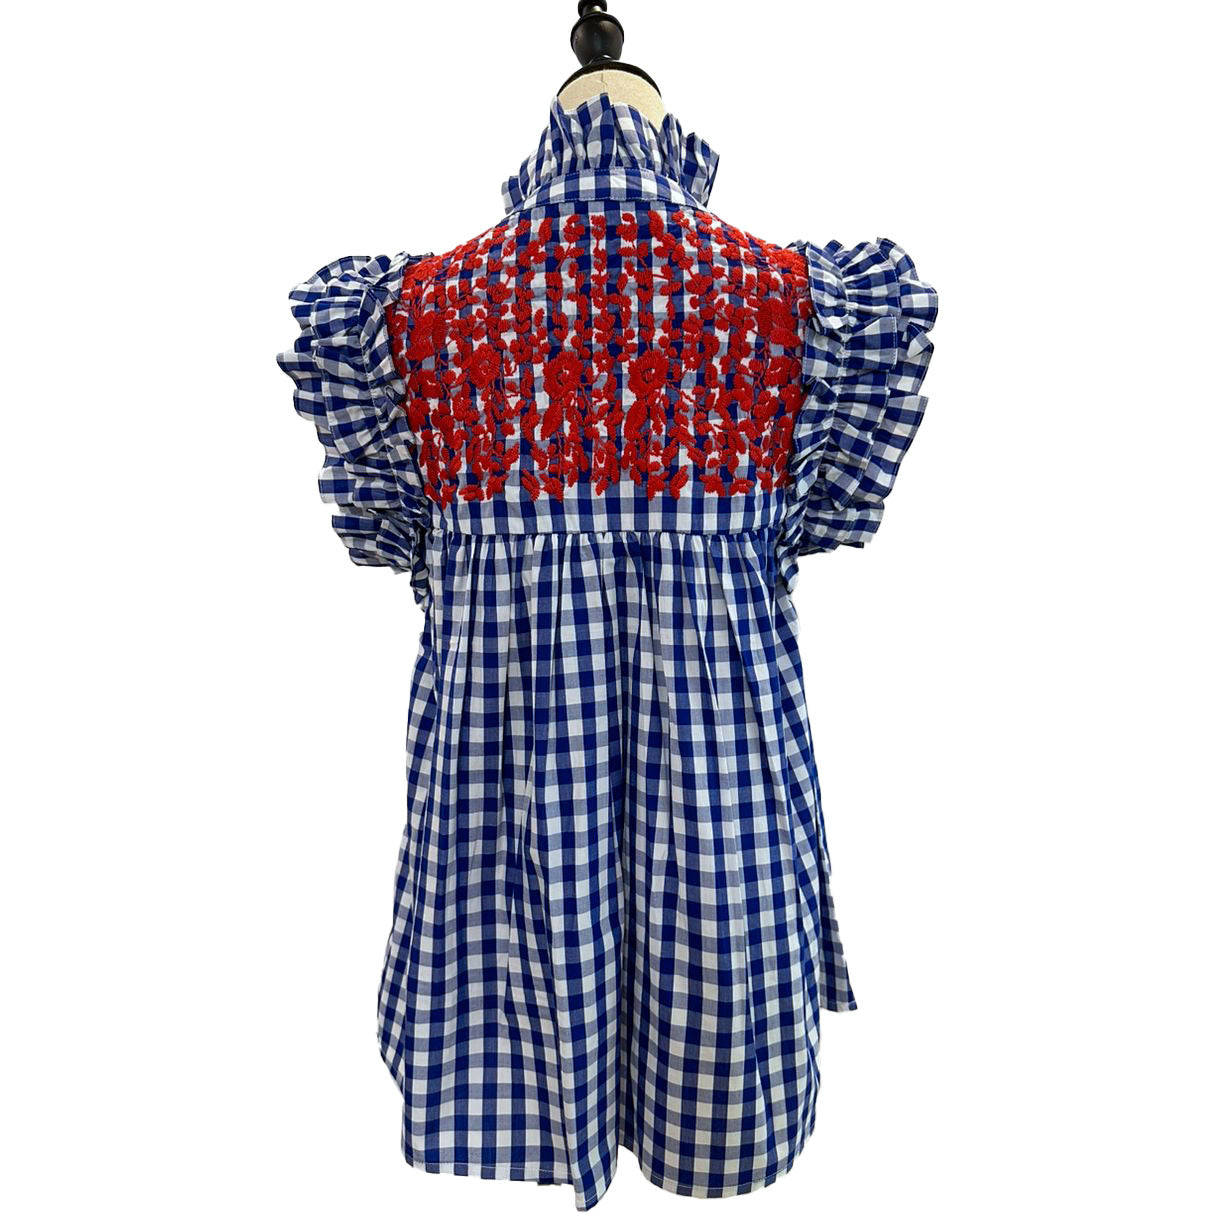 PRE-ORDER: Fourth of July Buffalo Check Hummingbird Blouse (mid-June delivery)